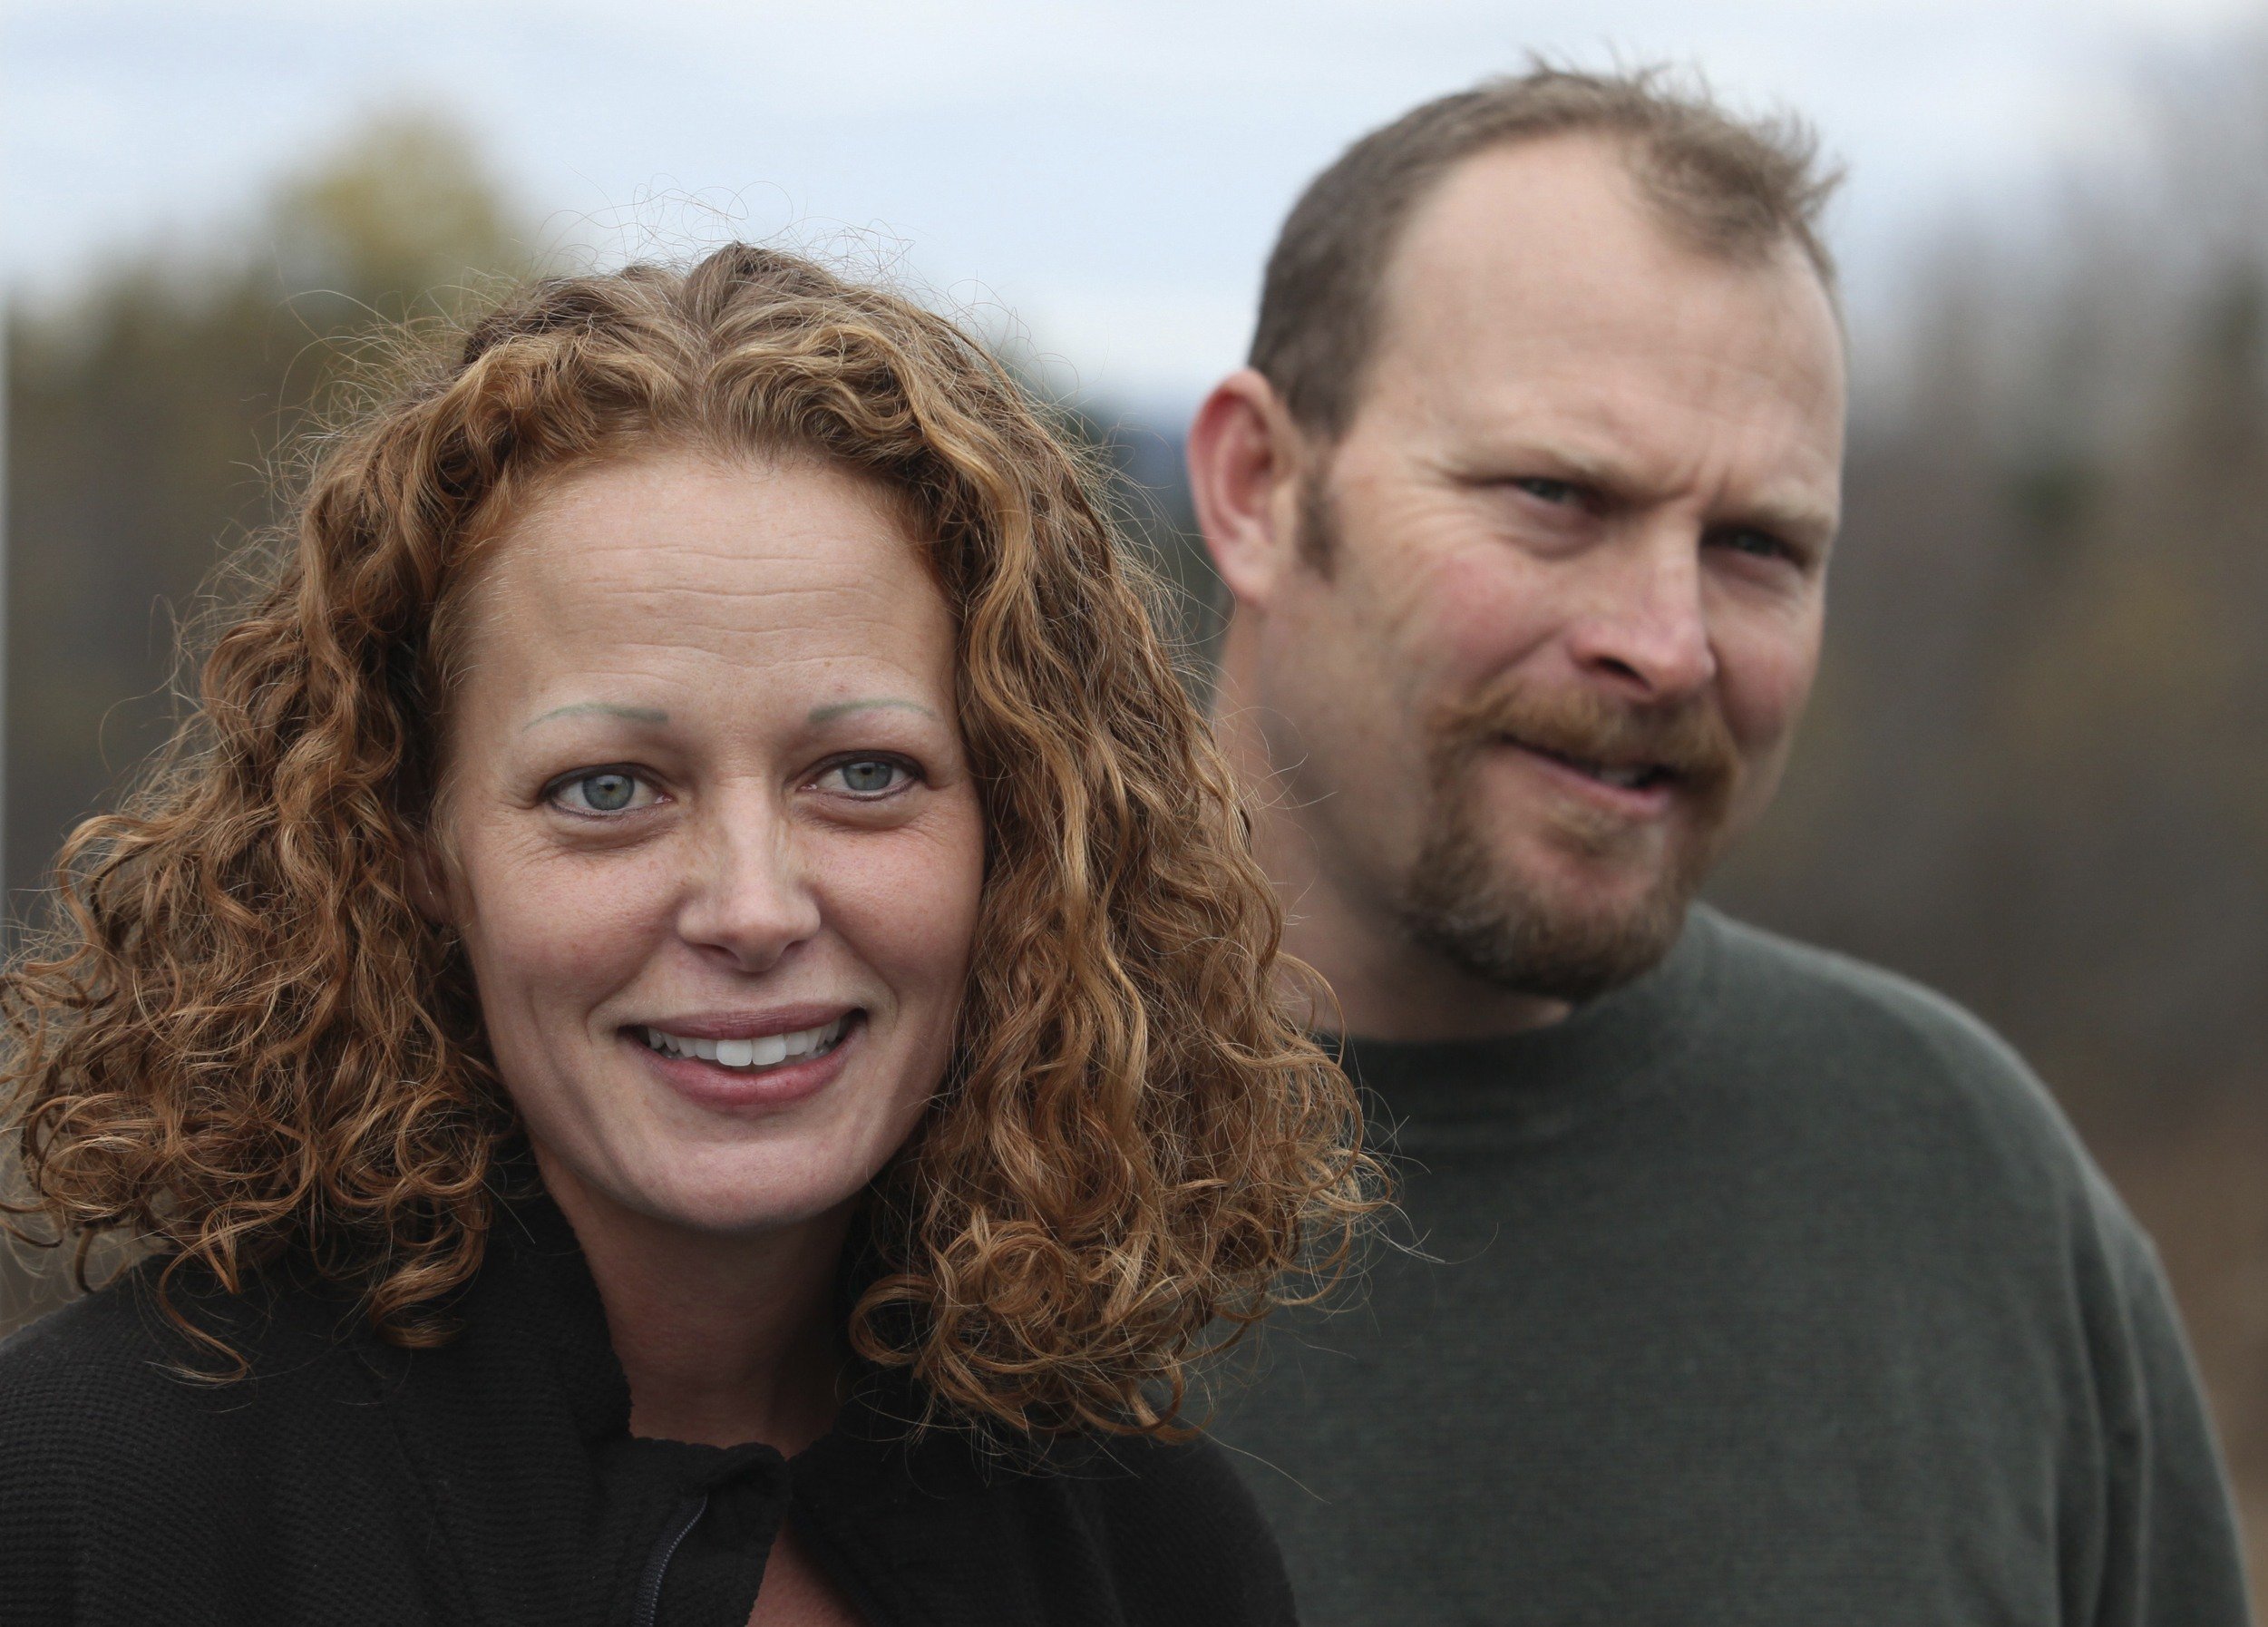 Nurse Kaci Hickox (L) joined by her boyfriend Ted Wilbur, speaks with the media outside of their home in Fort Kent, Maine on Oct. 31, 2014. (Joel Page—Reuters)